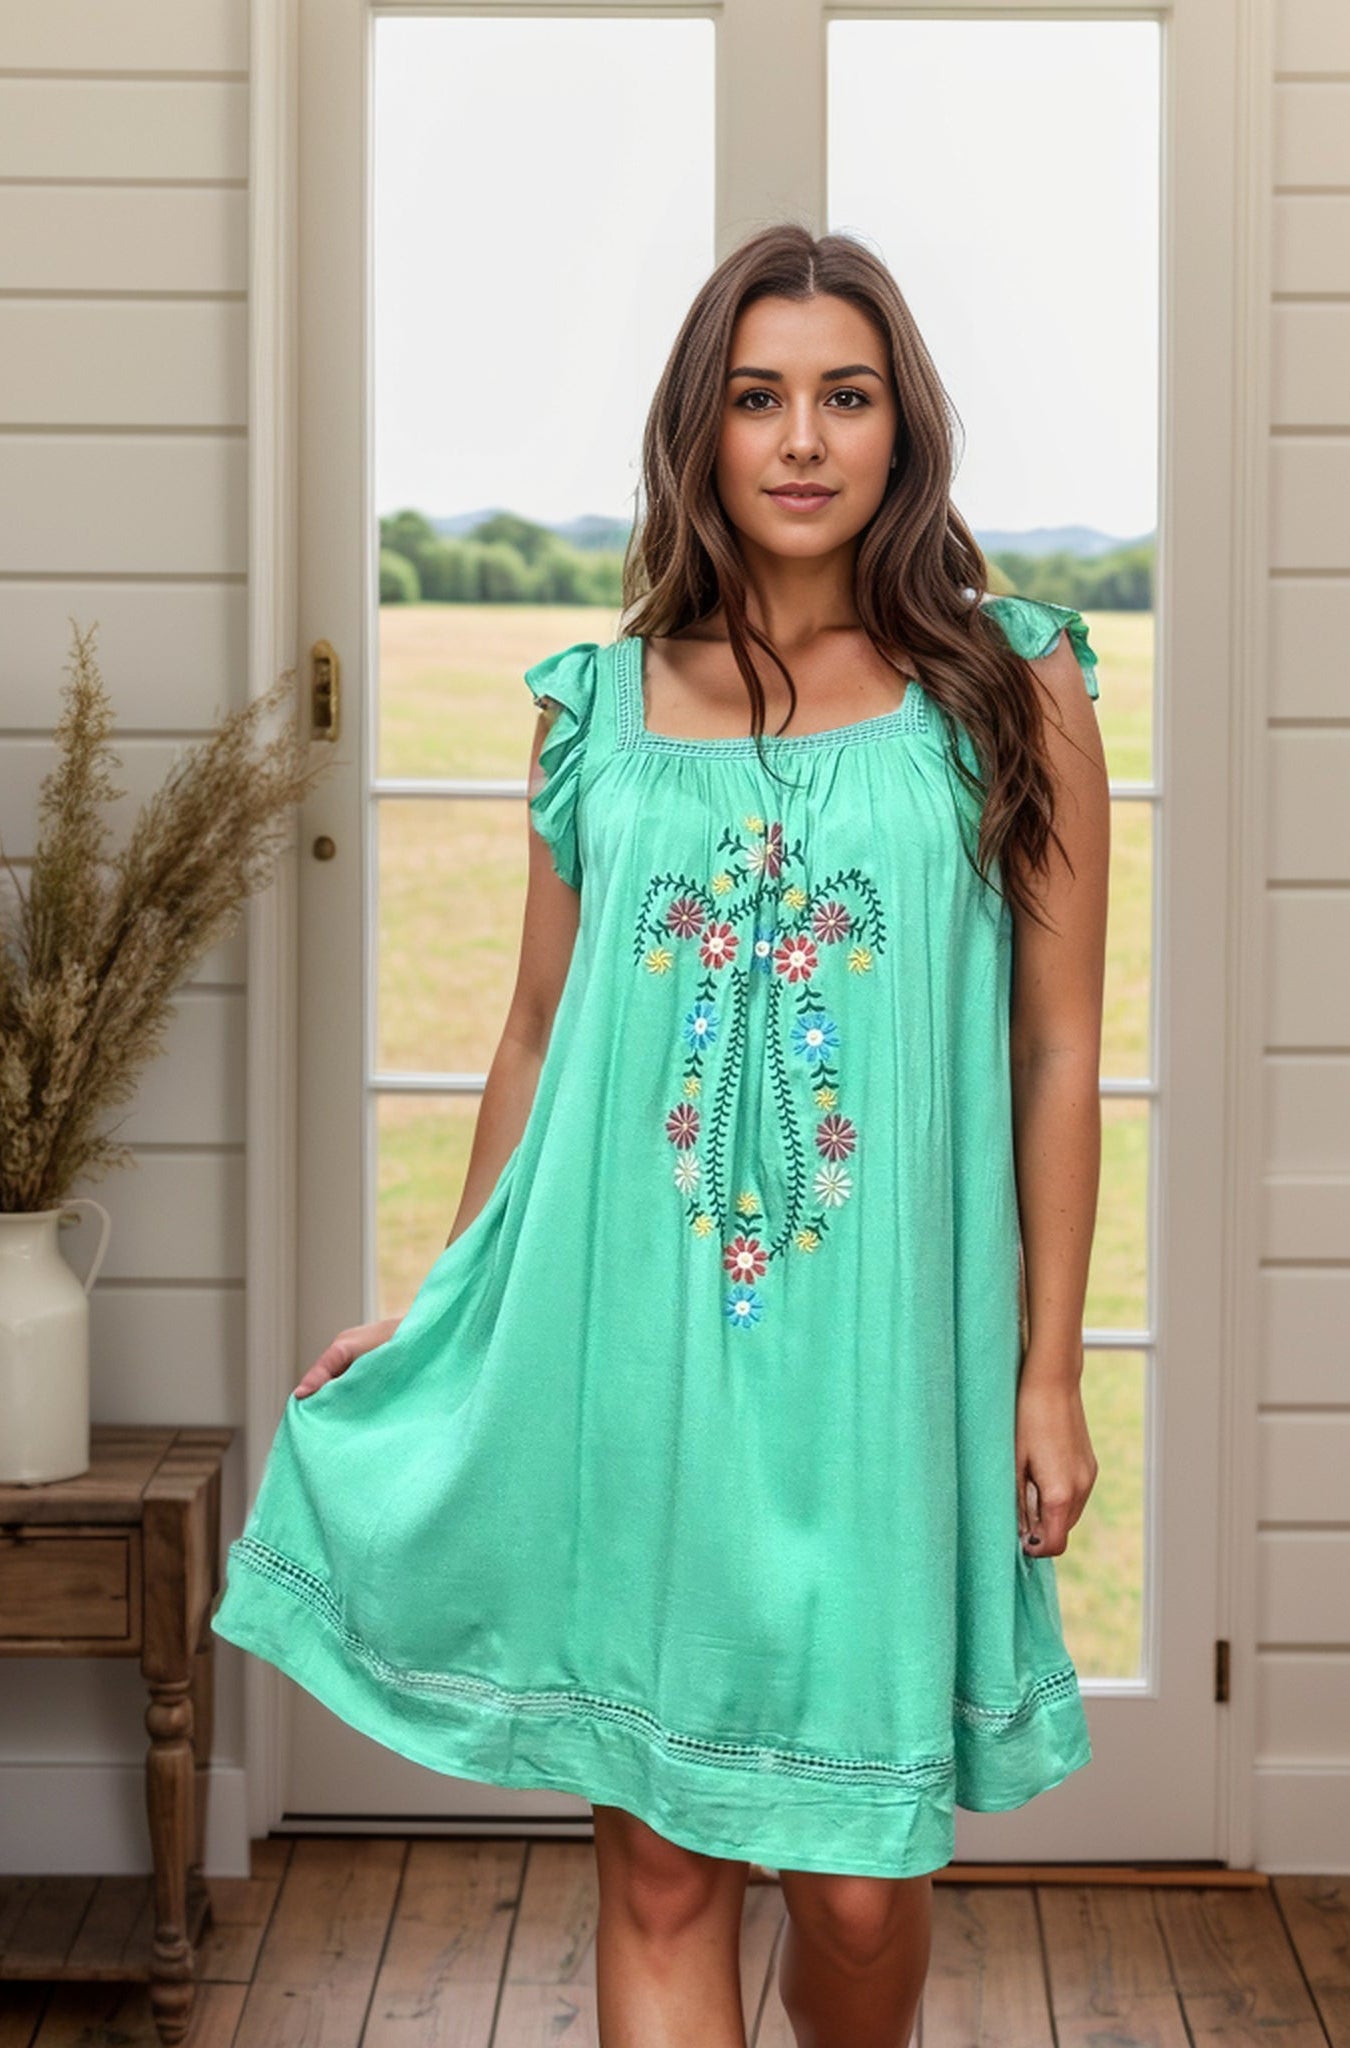 Angel Under Cover - Embroidered Dress Boutique Simplified